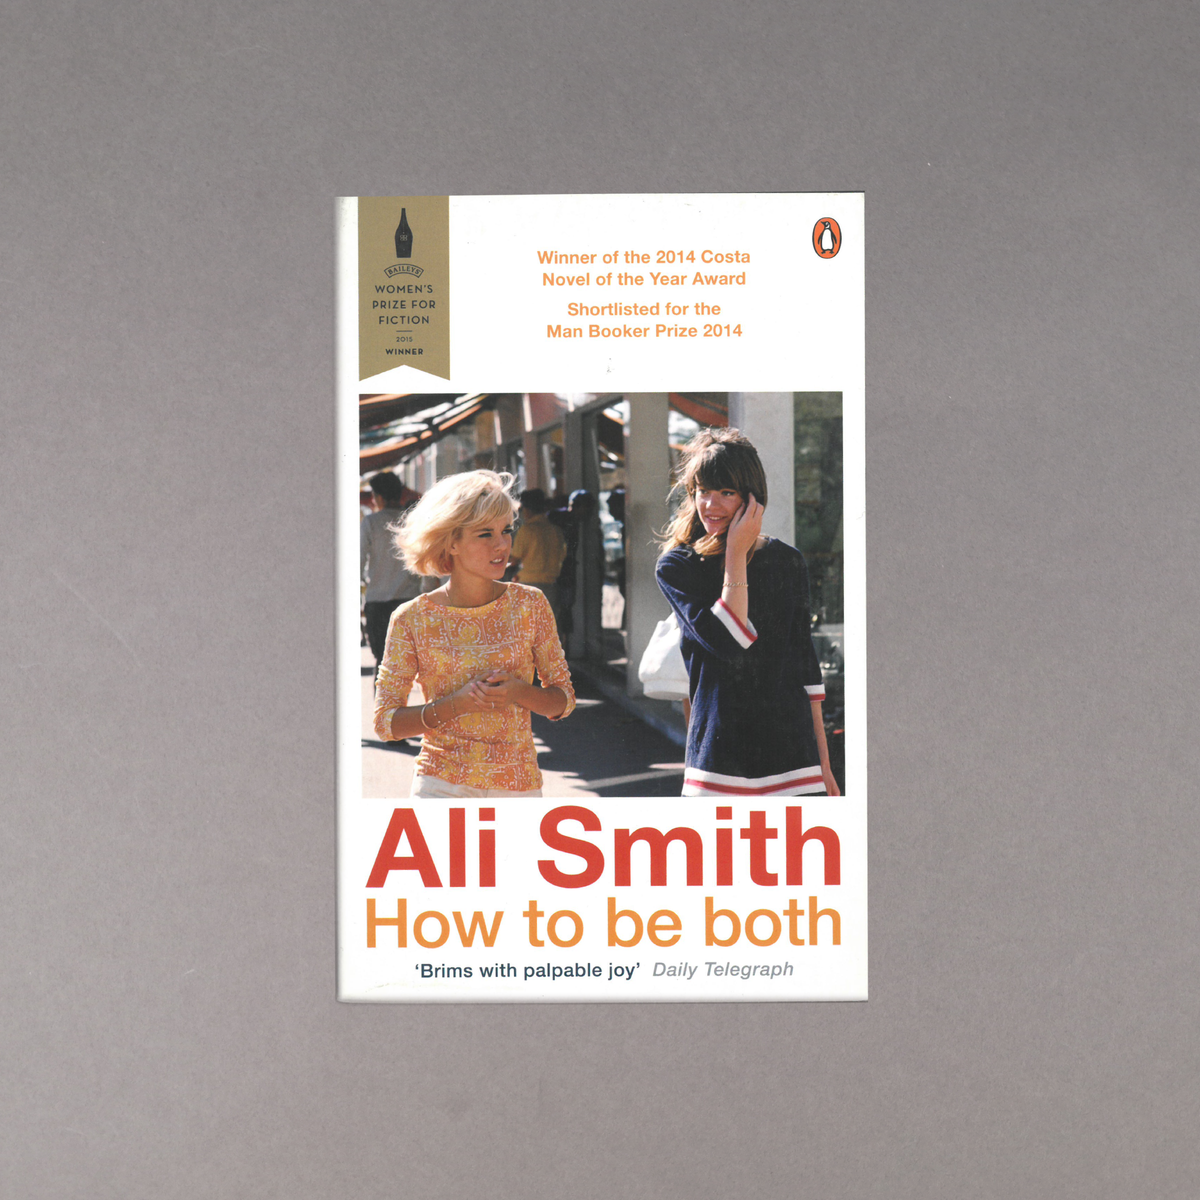 How to be both Ali Smith